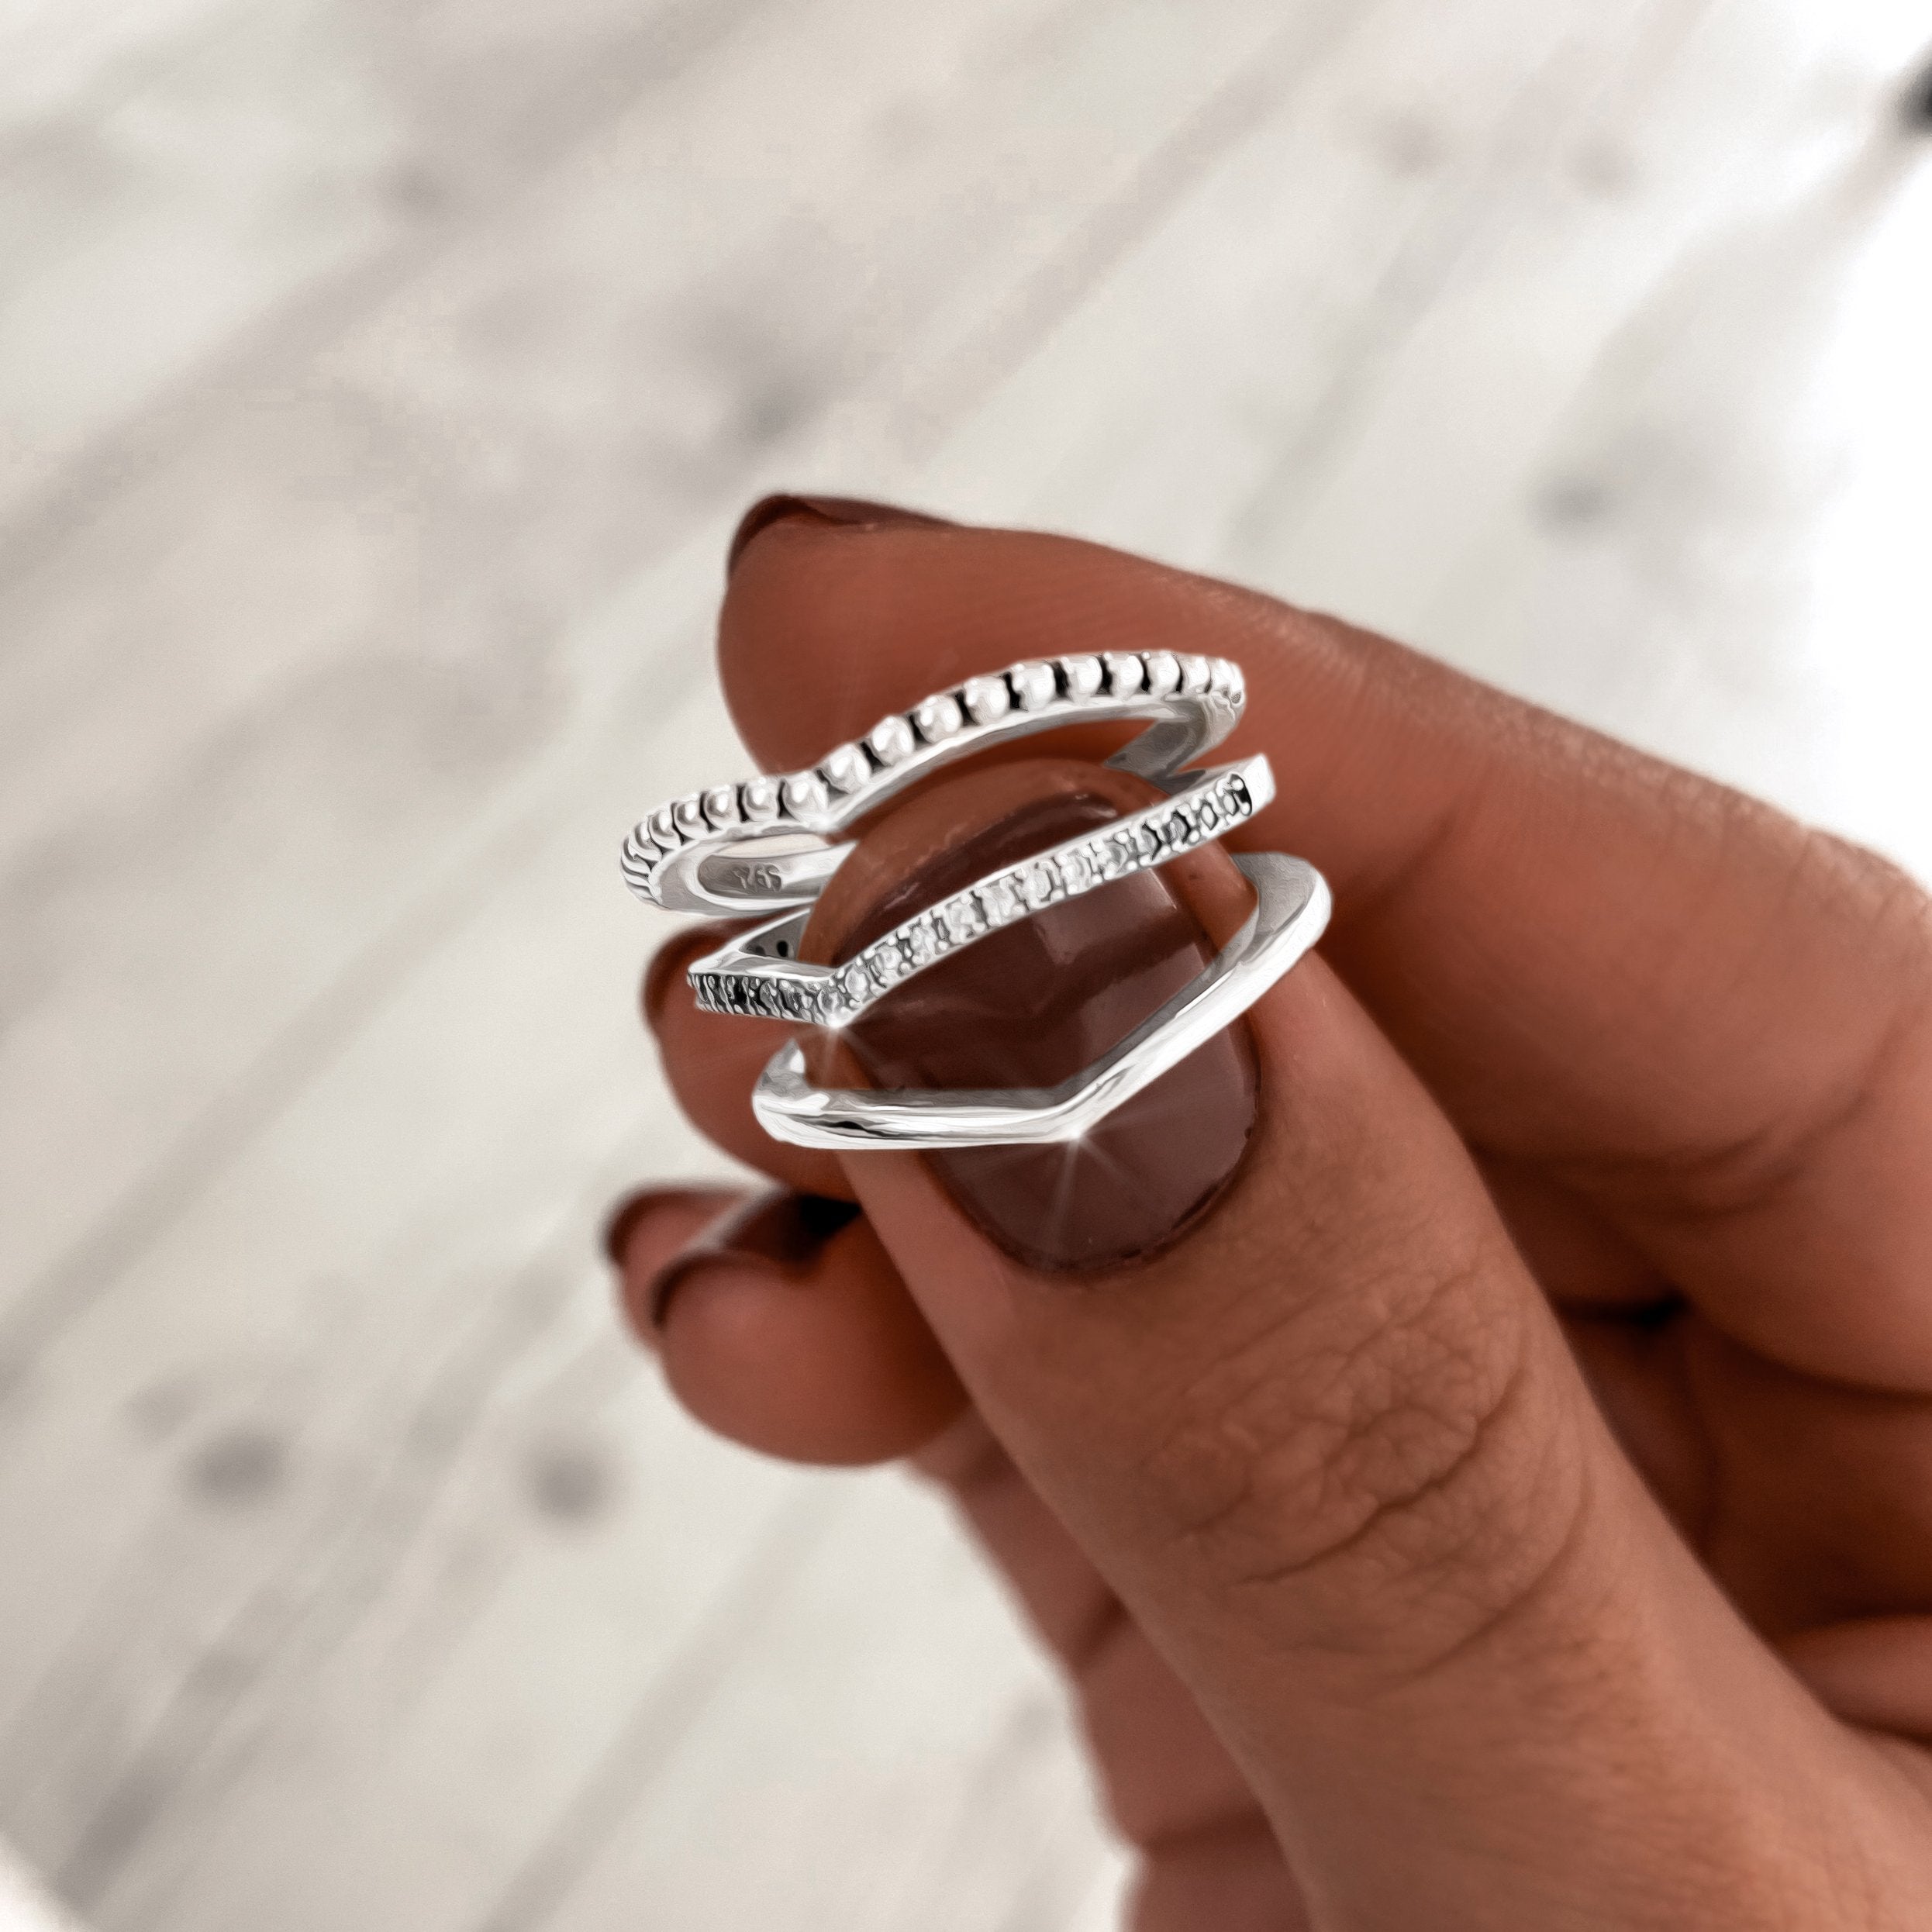 How to Find a Ring Size